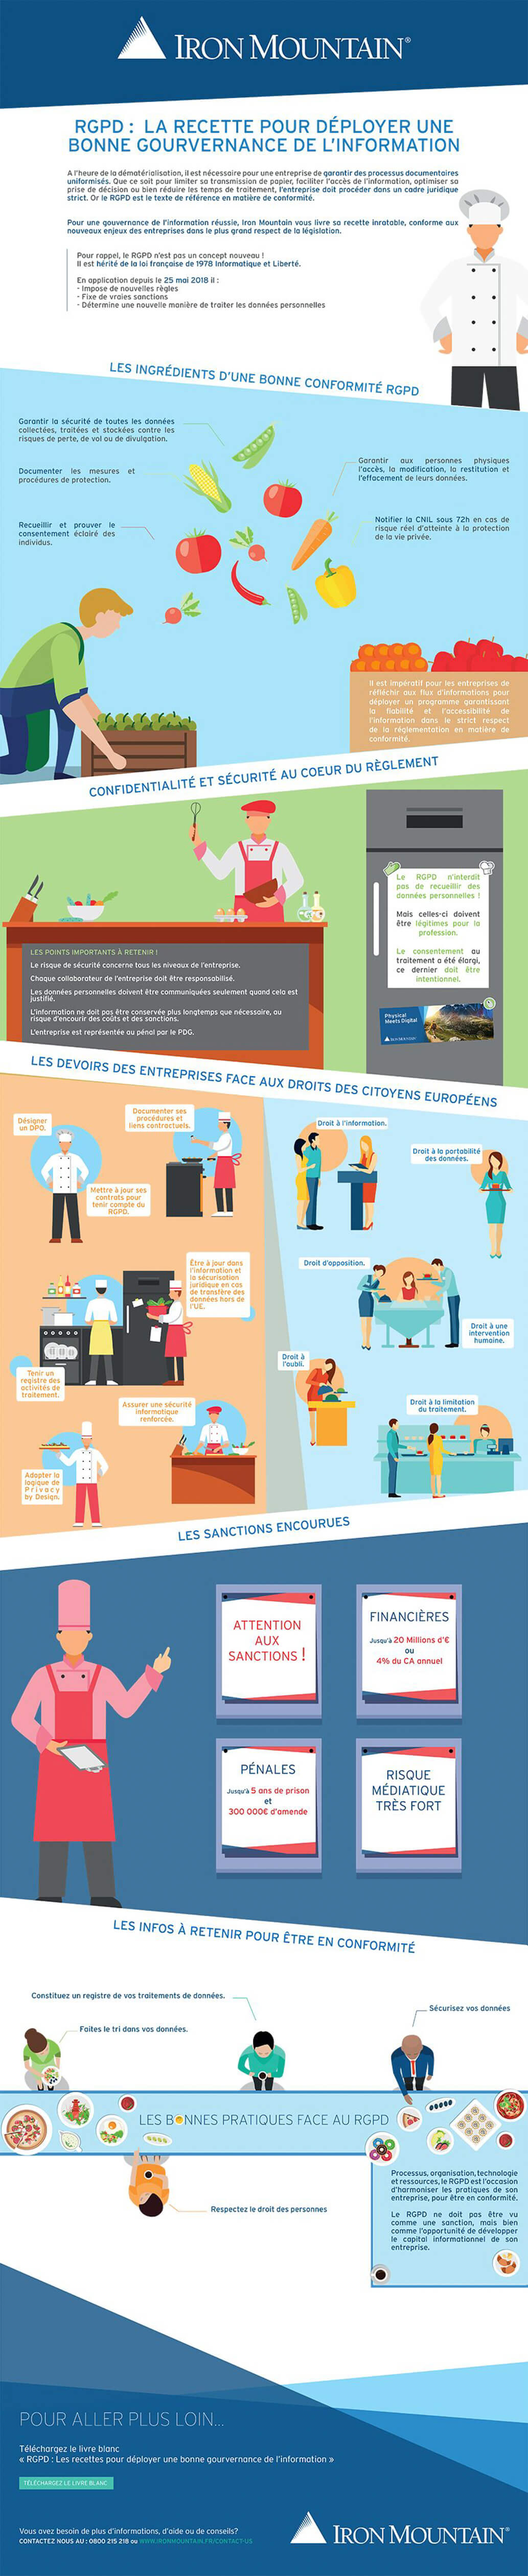 An infographic in French titled "RGPD: The Recipe to Deploy a Good Governance of Information"